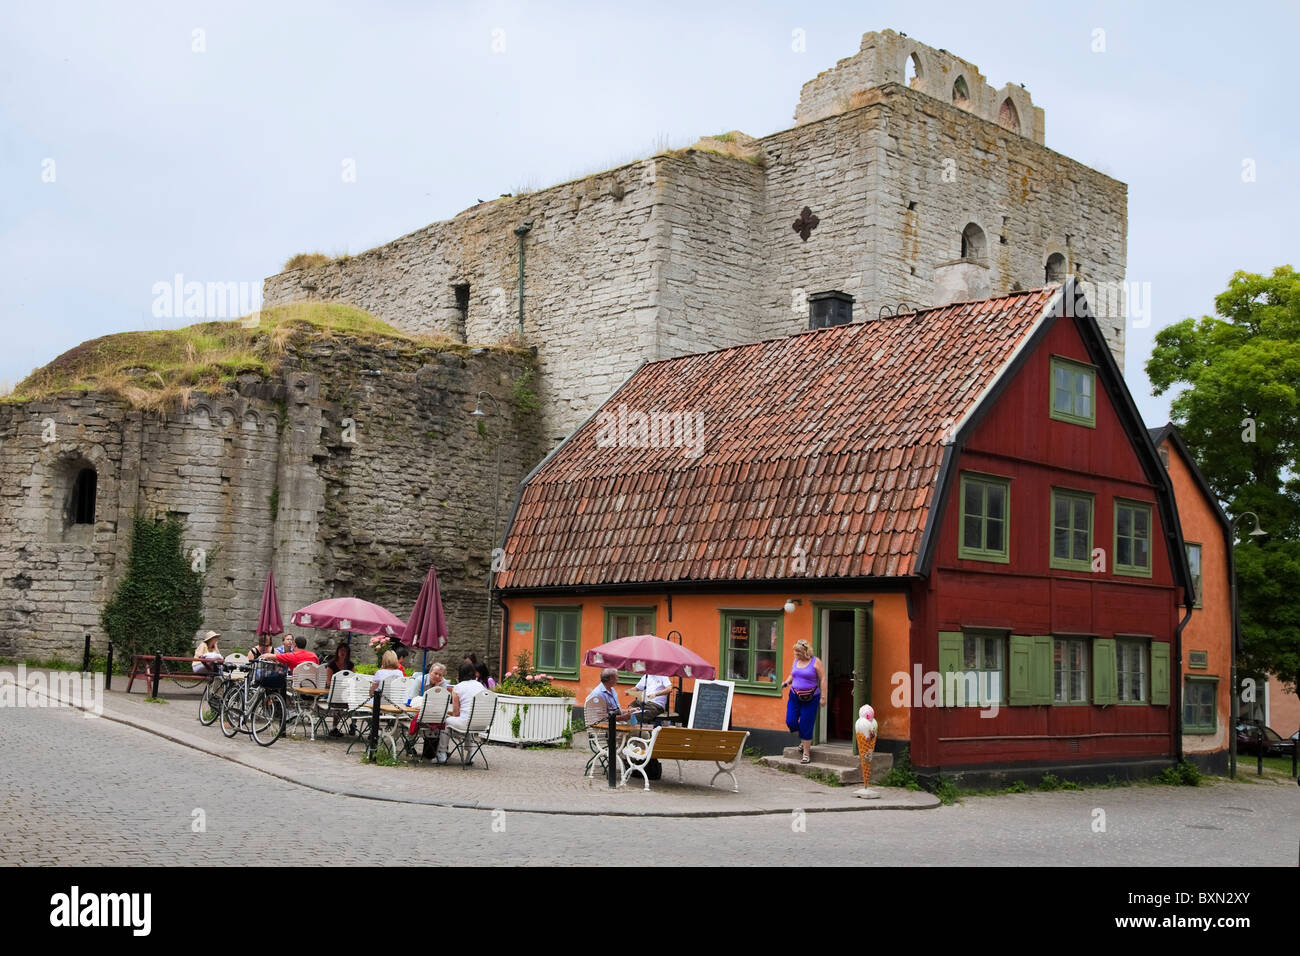 Cafe next to church ruin in Unesco World Heritage town Visby, Gotland, Sweden. Stock Photo